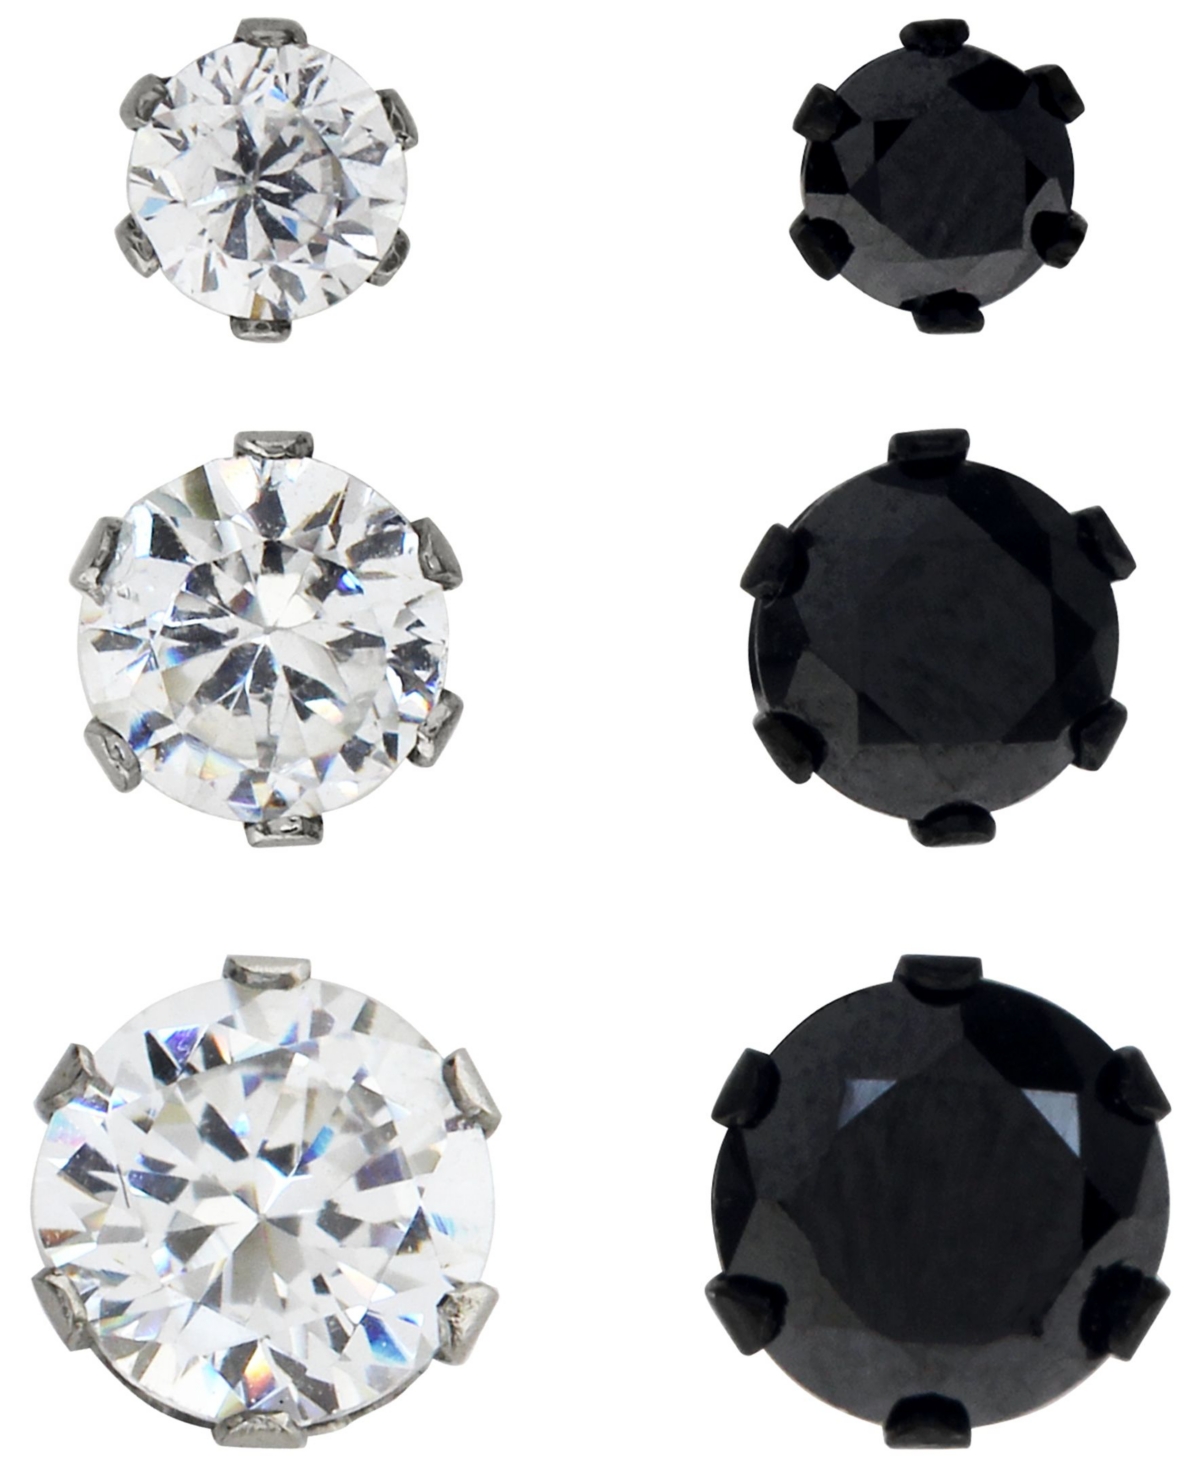 Sutton Stainless Steel Two-Tone Cubic Zirconia Stud Earrings Set Of 3 Pairs - Multi